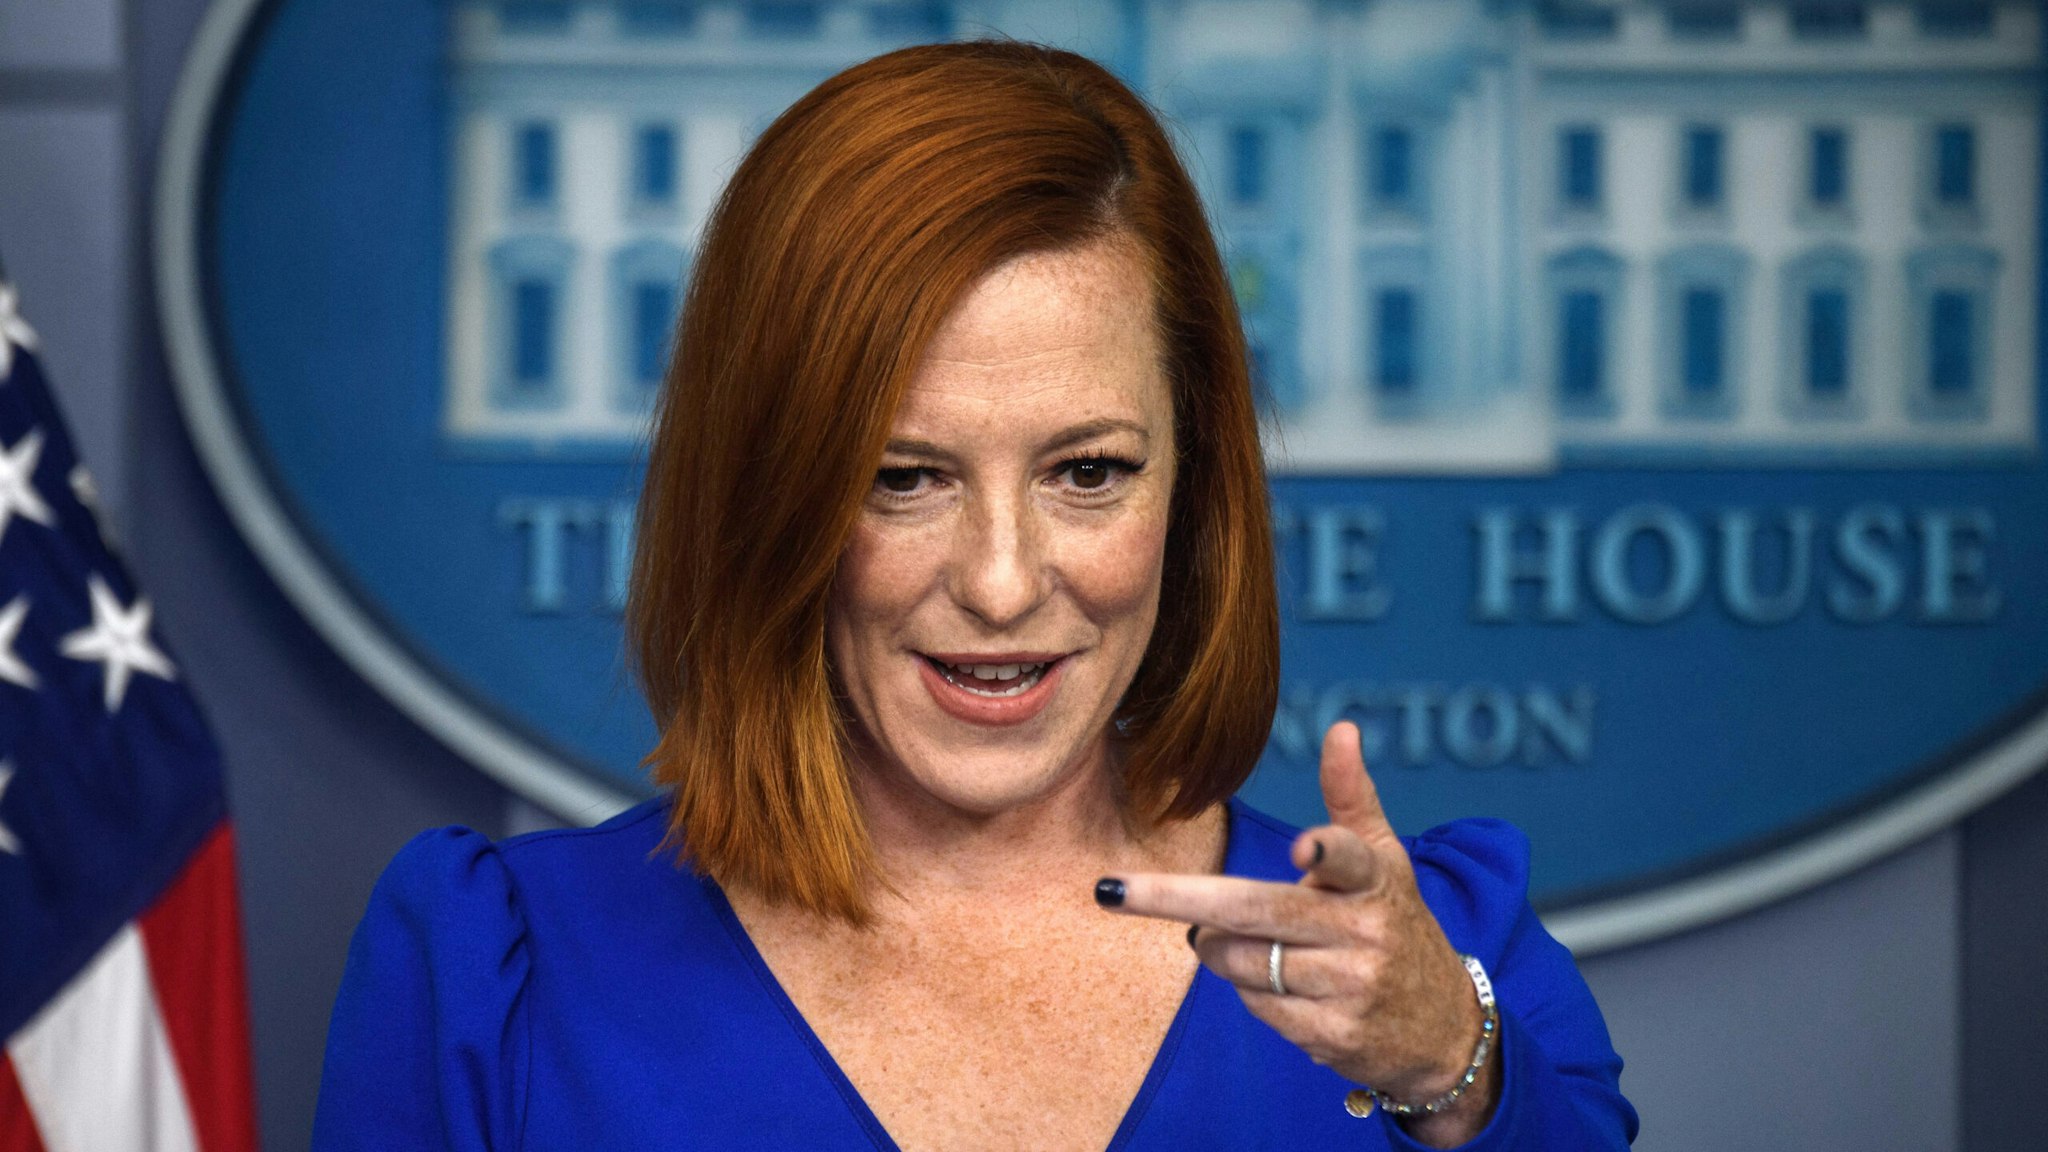 White House Press Secretary Jen Psaki speaks during the daily press briefing on October 27, 2021, in the Brady Briefing Room of the White House in Washington, DC.